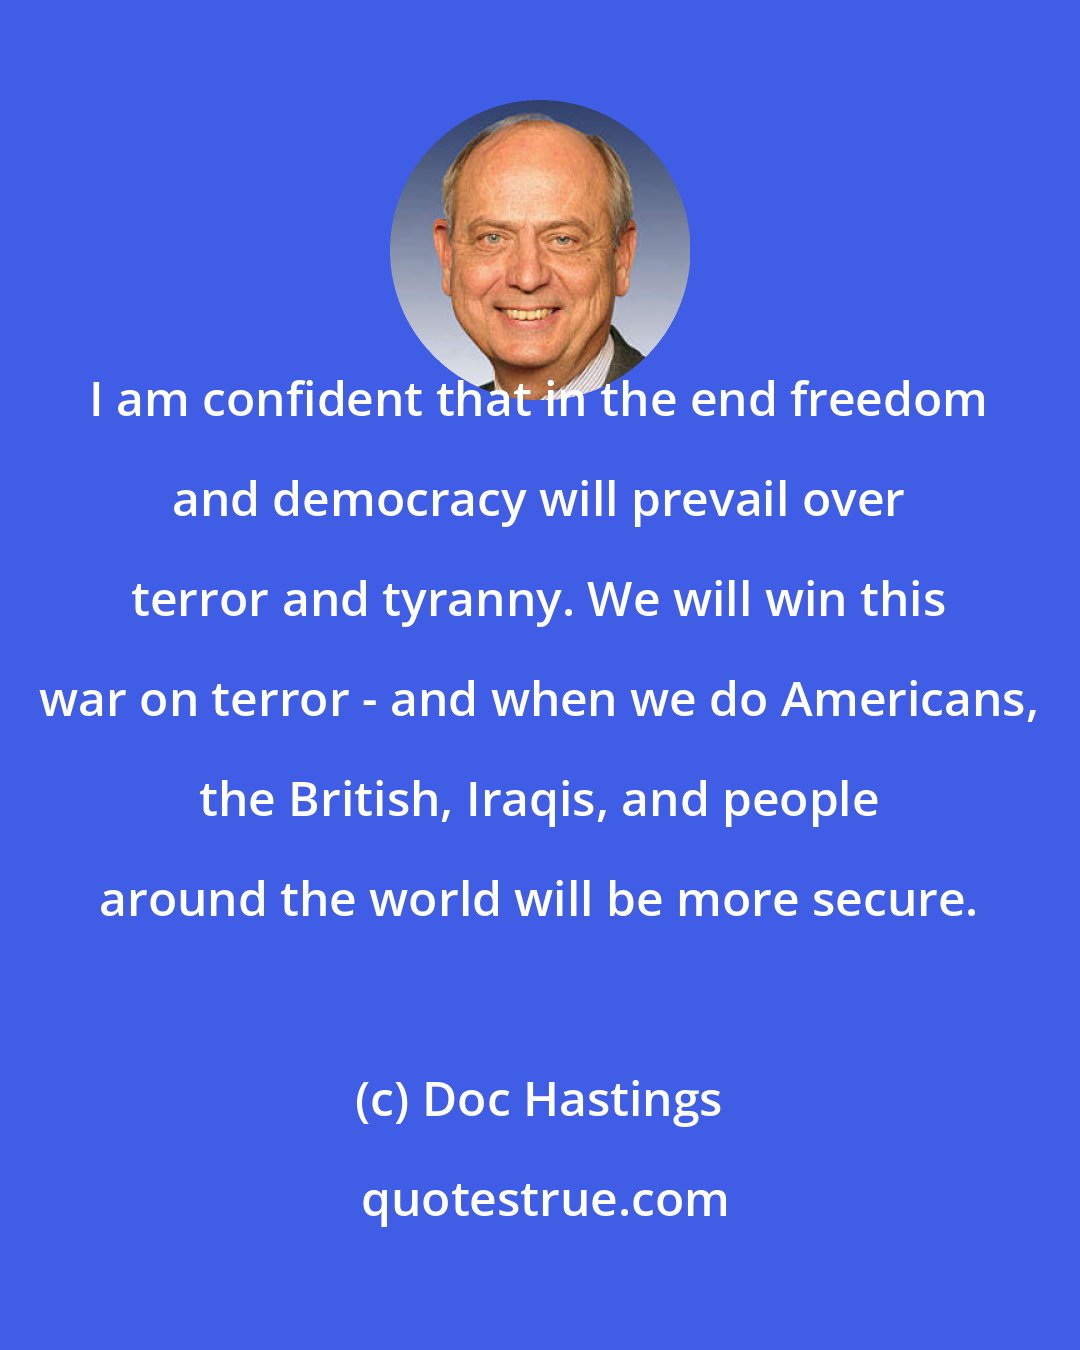 Doc Hastings: I am confident that in the end freedom and democracy will prevail over terror and tyranny. We will win this war on terror - and when we do Americans, the British, Iraqis, and people around the world will be more secure.